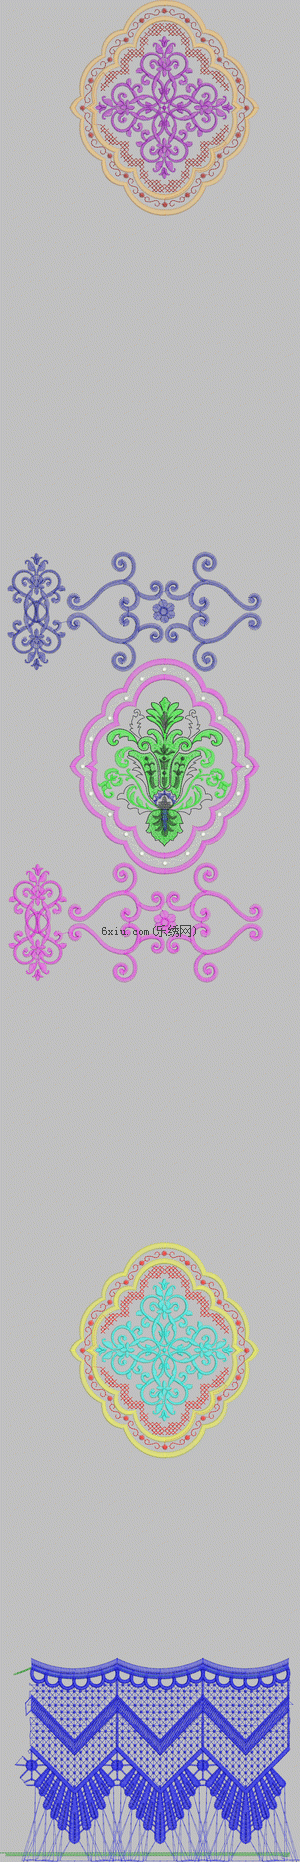 The curtain embroidery pattern album